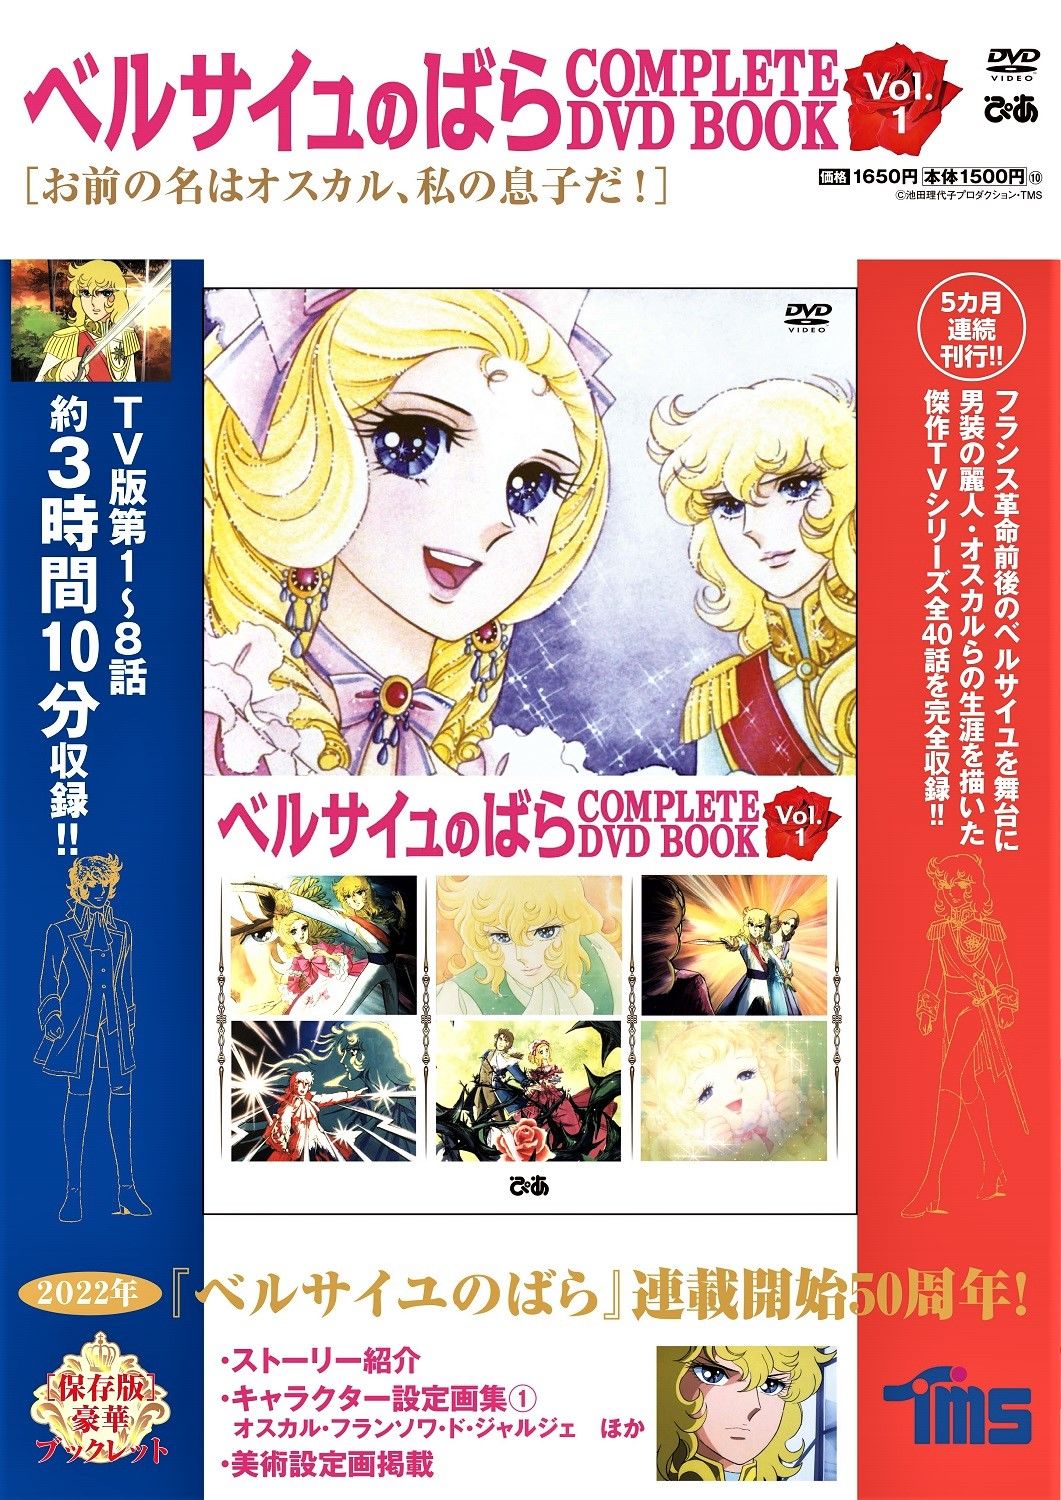 The year 2022 also saw lavish DVD reissues for the hit anime adaptation of The Rose of Versailles, originally aired from 1979. (©︎ Pia Corporation)